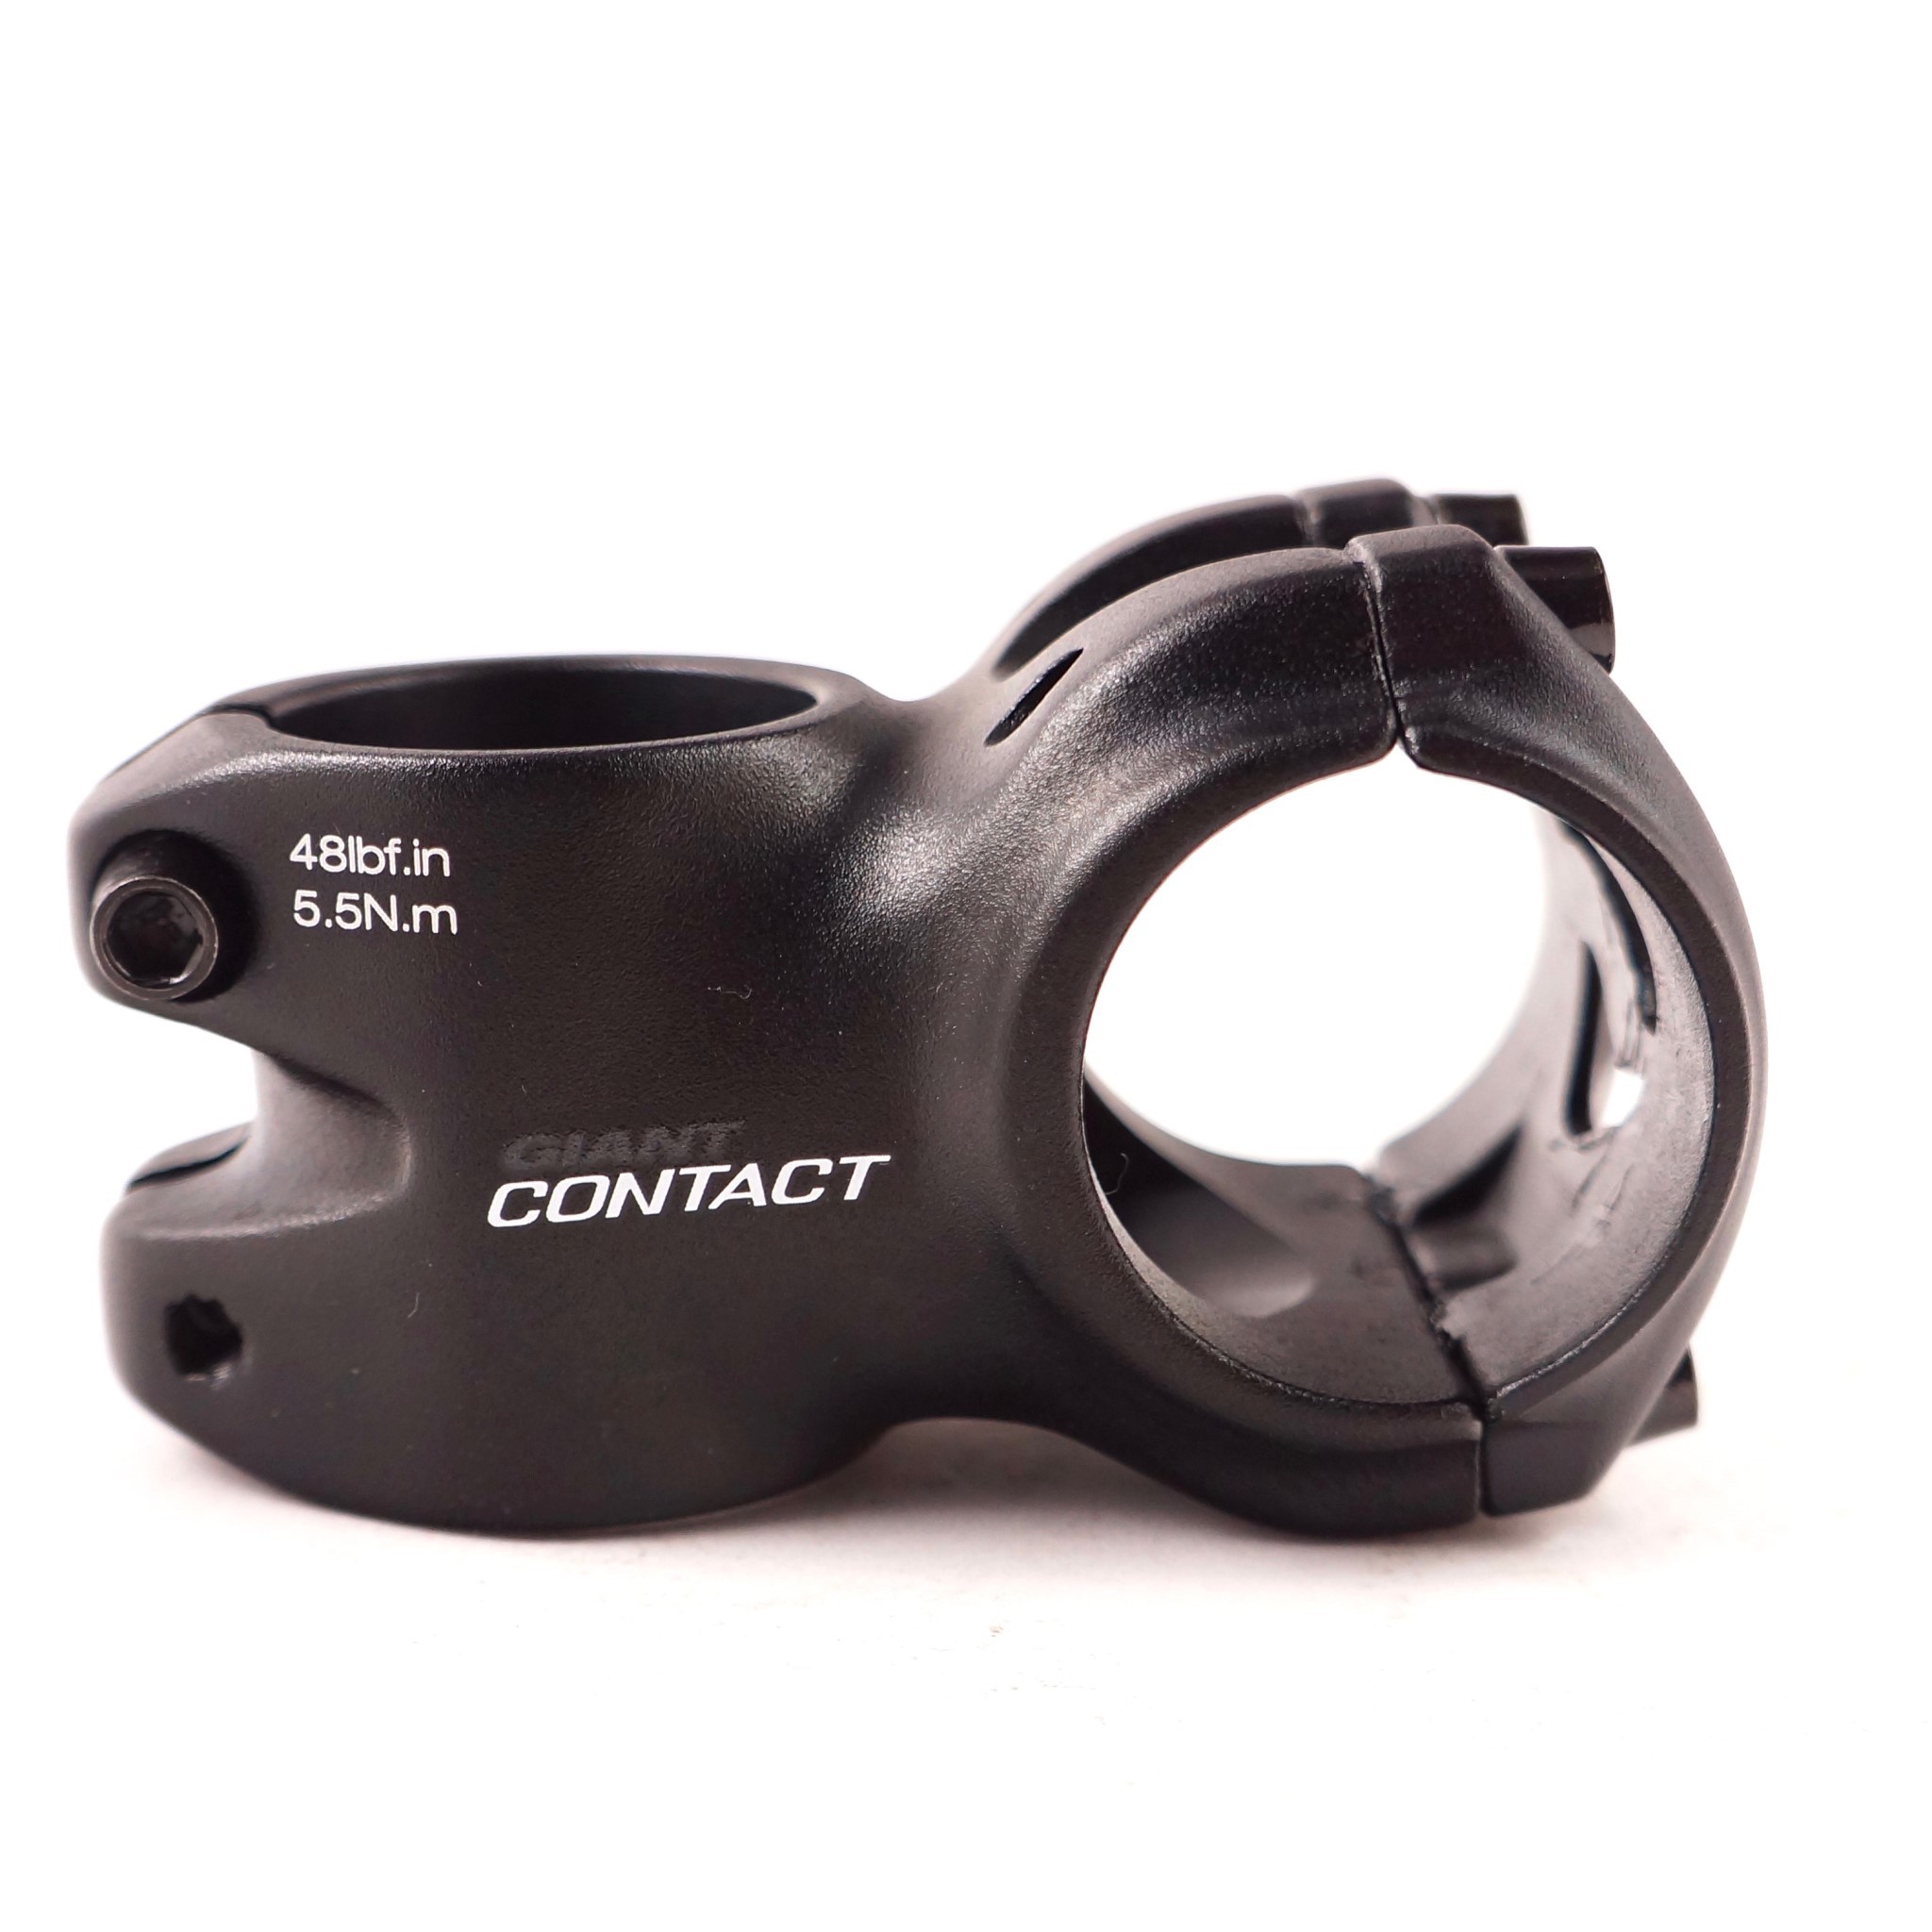 // 8 Degree Black Stem 1-1//4 and 1-1//8 spacer GIANT Contact OD2 50mm